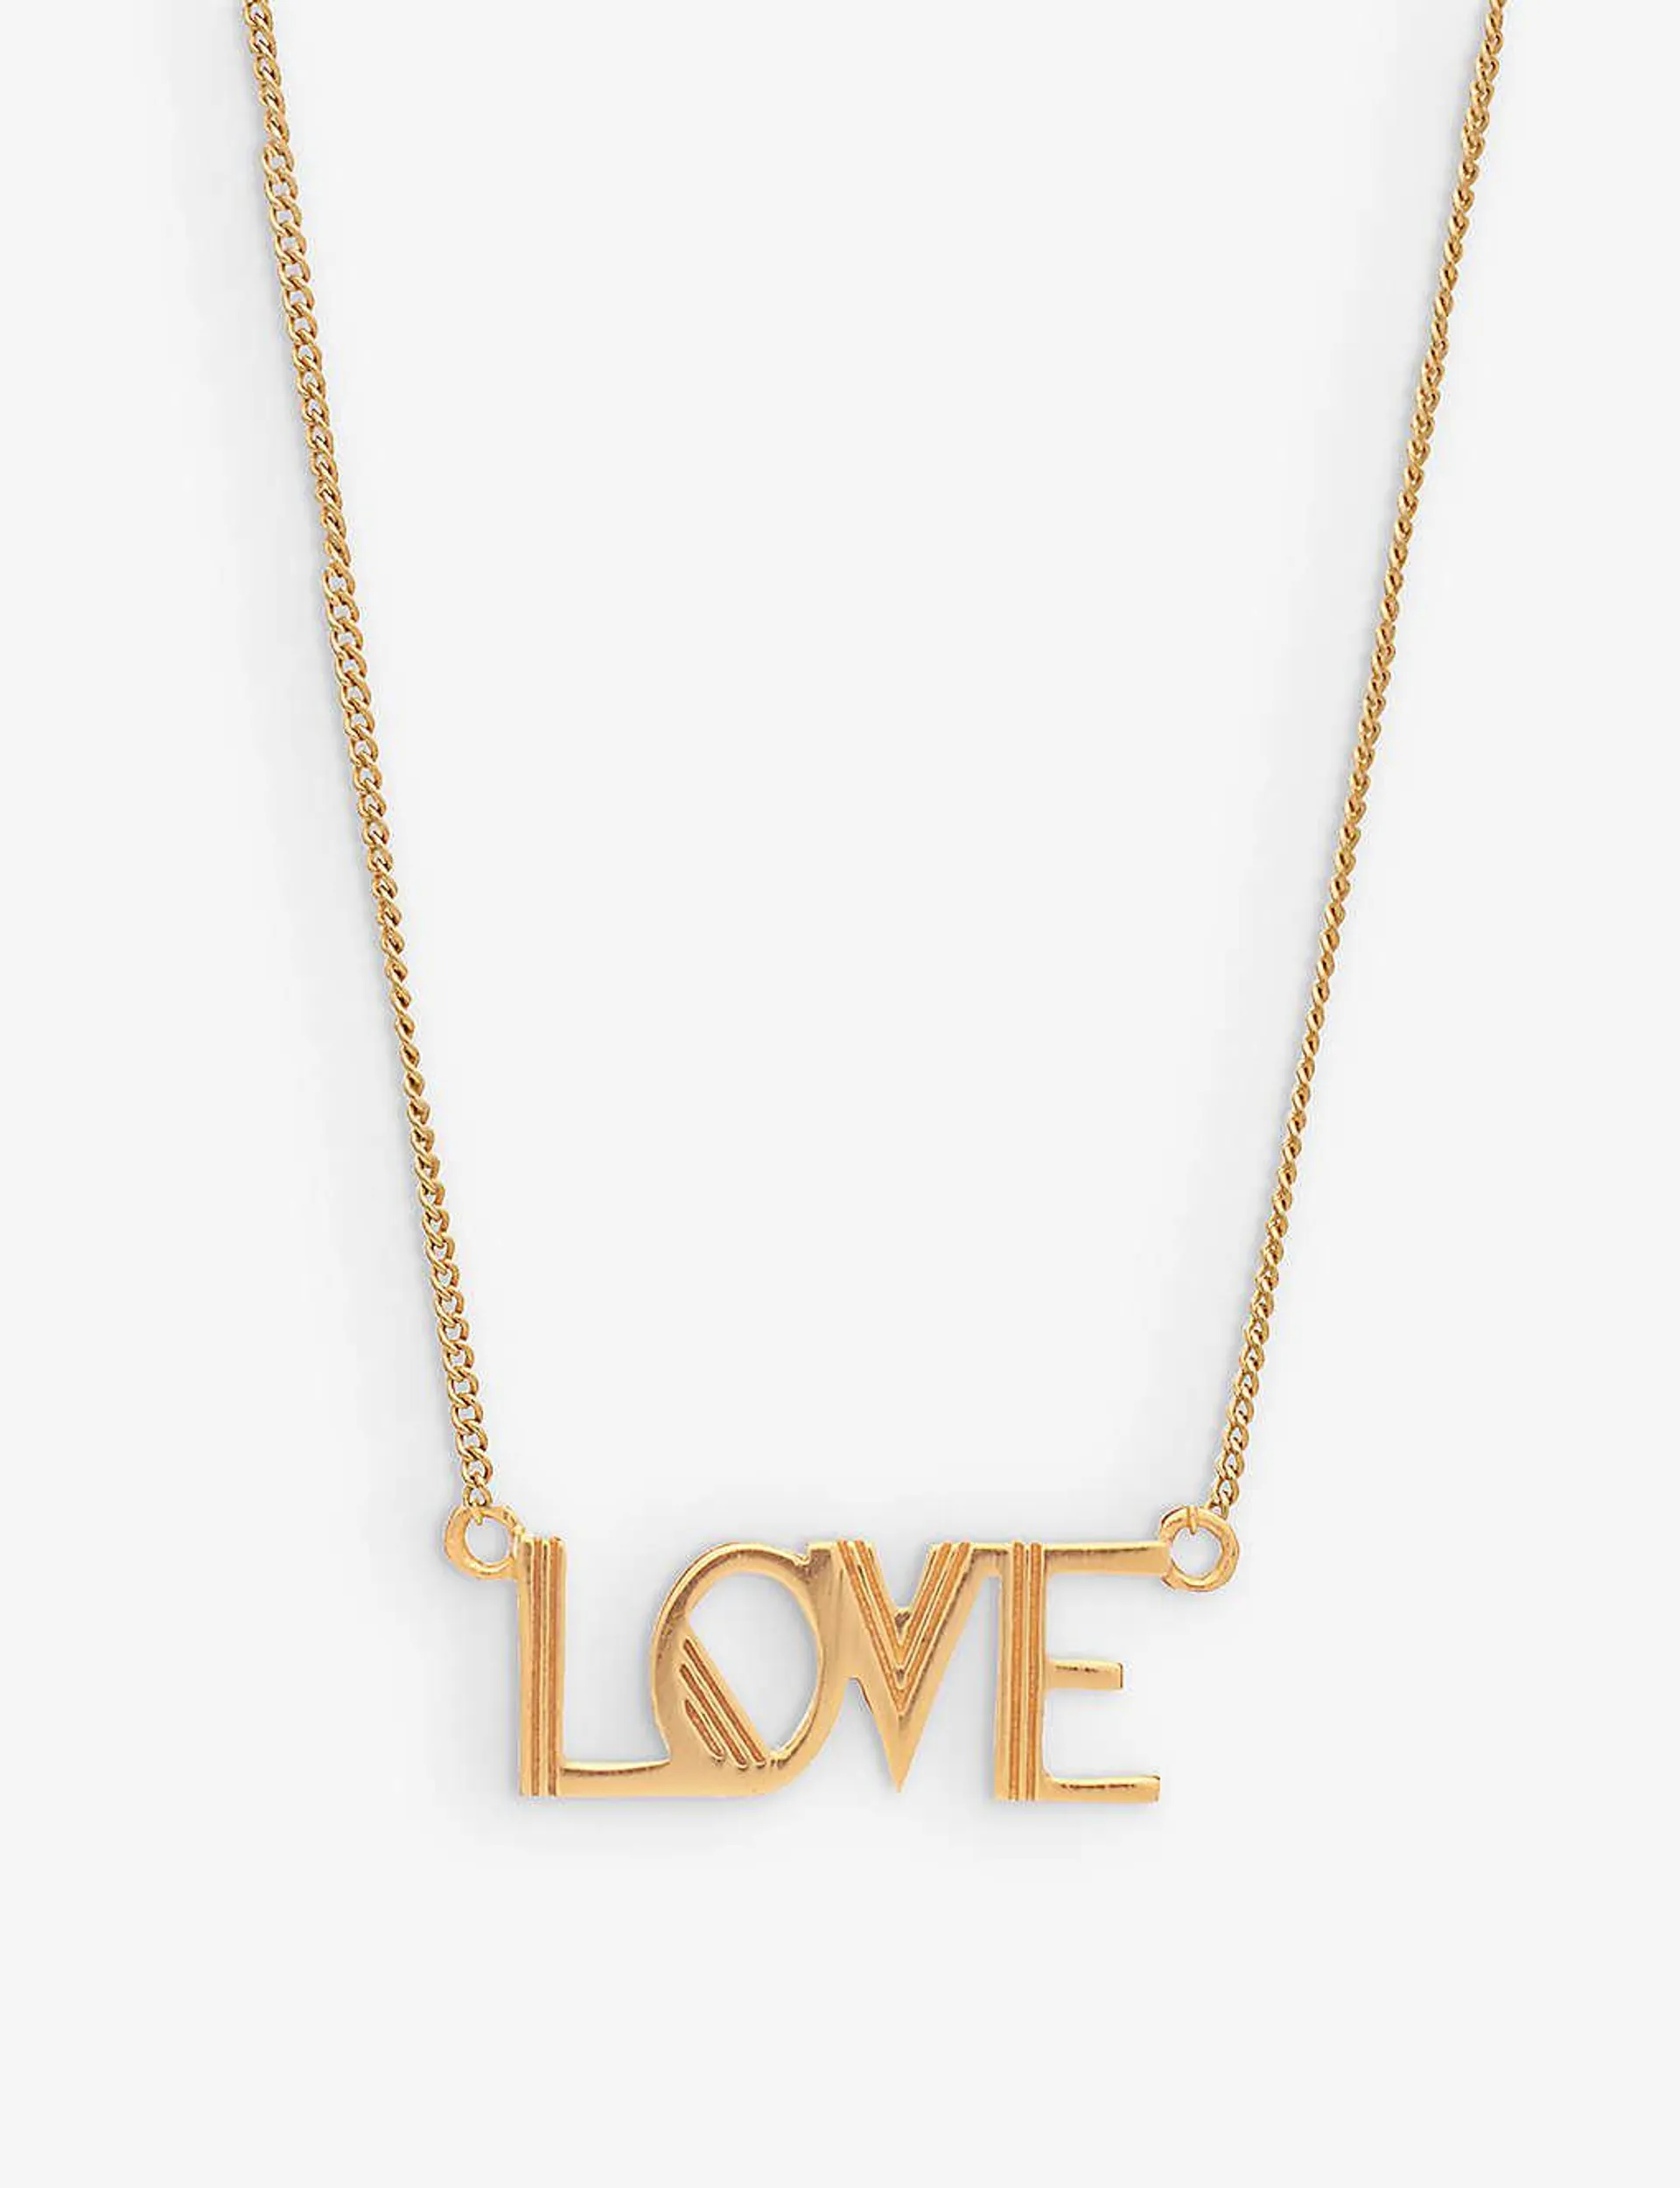 Art Deco Love 22-carat gold-plated sterling-silver necklace